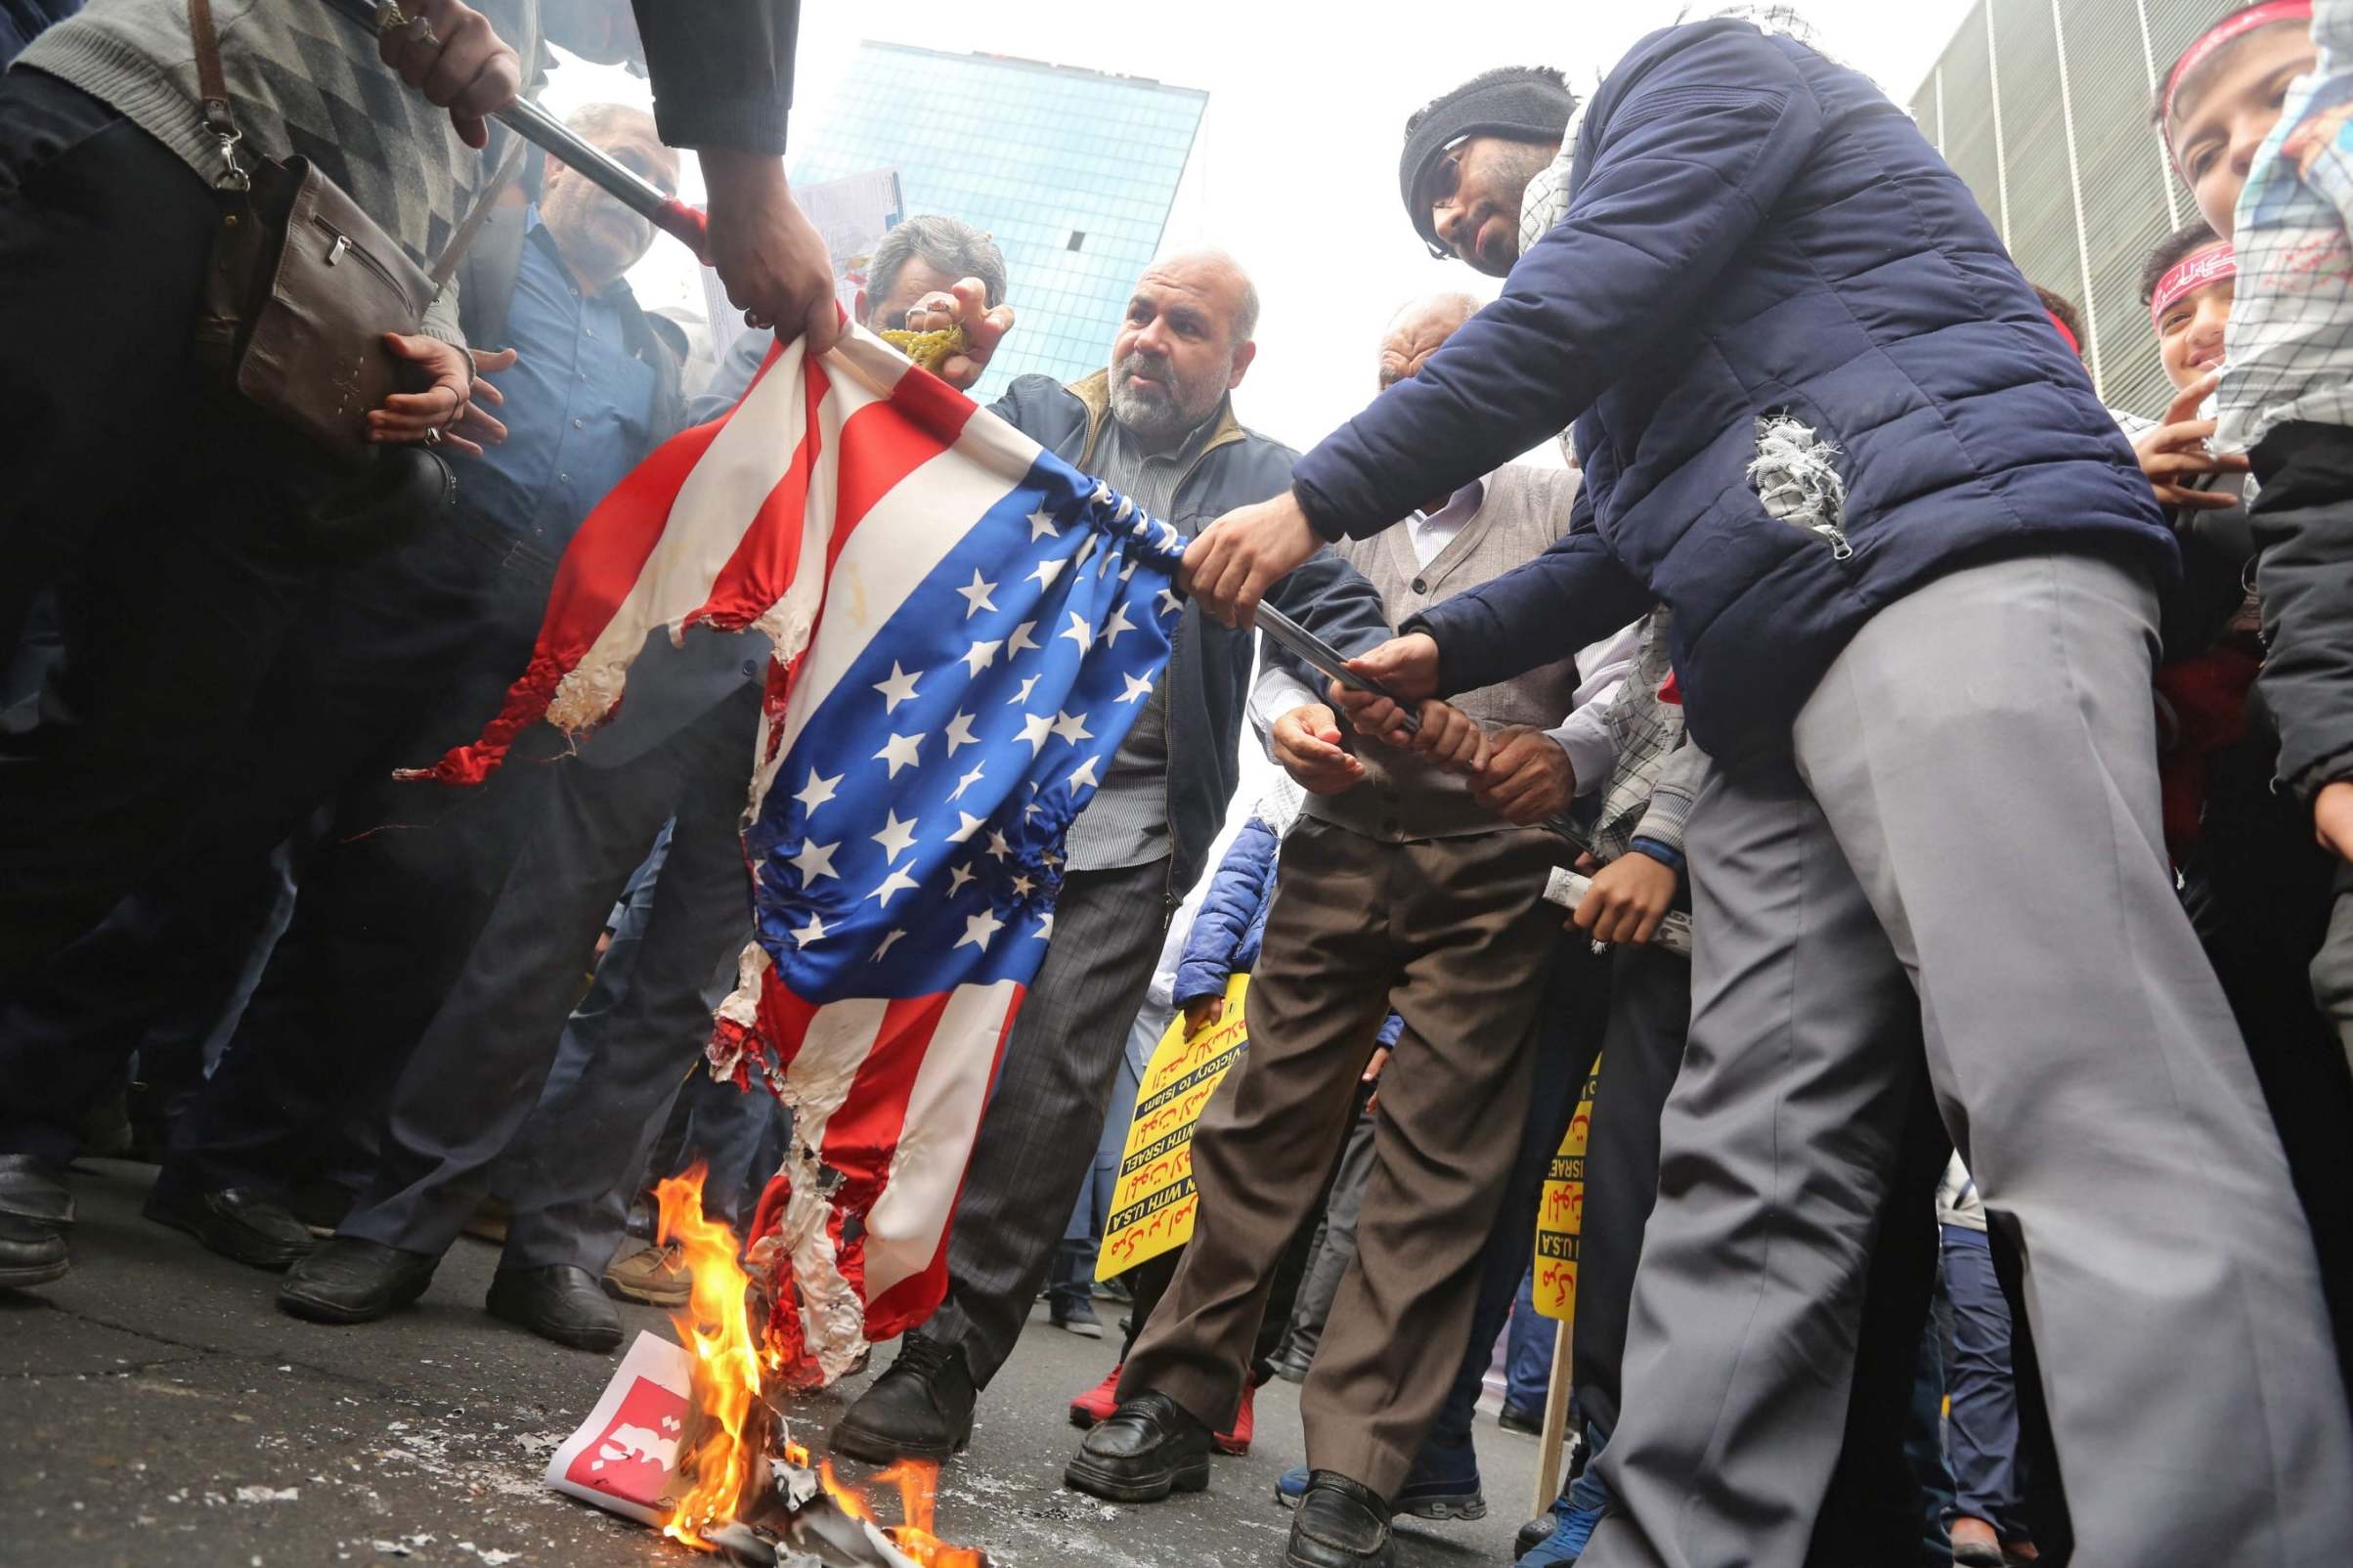 Iranian protesters set a US flag on fire during a rally outside the former US embassy in the Iranian capital Tehran on November 4, 2019, to mark the 40th anniversary of the Iran hostage crisis